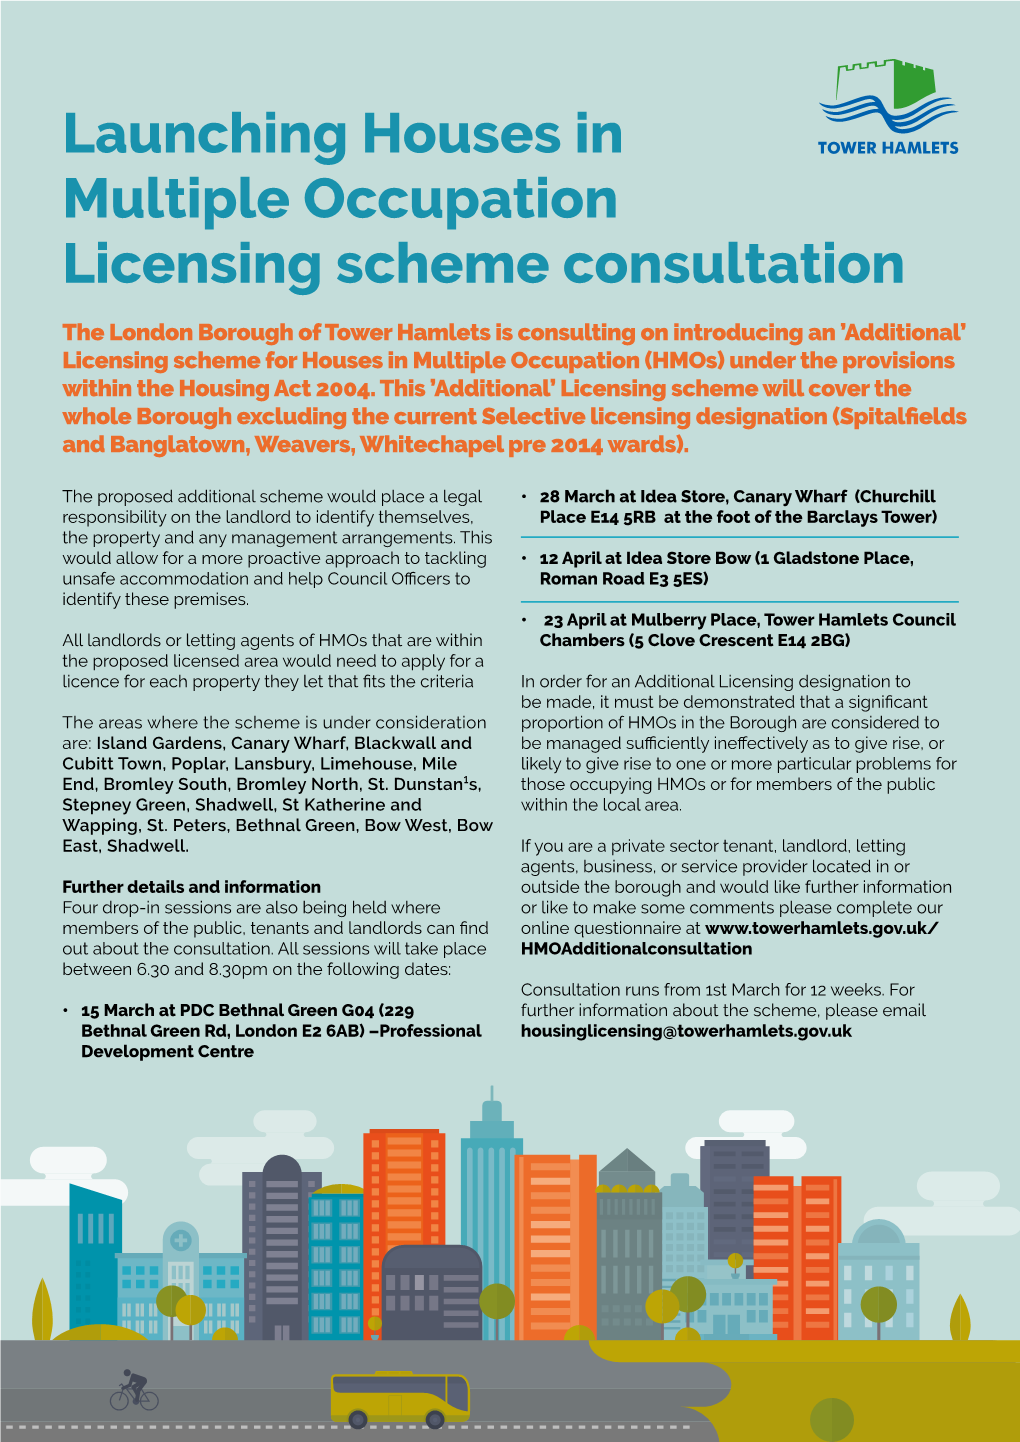 Launching Houses in Multiple Occupation Licensing Scheme Consultation